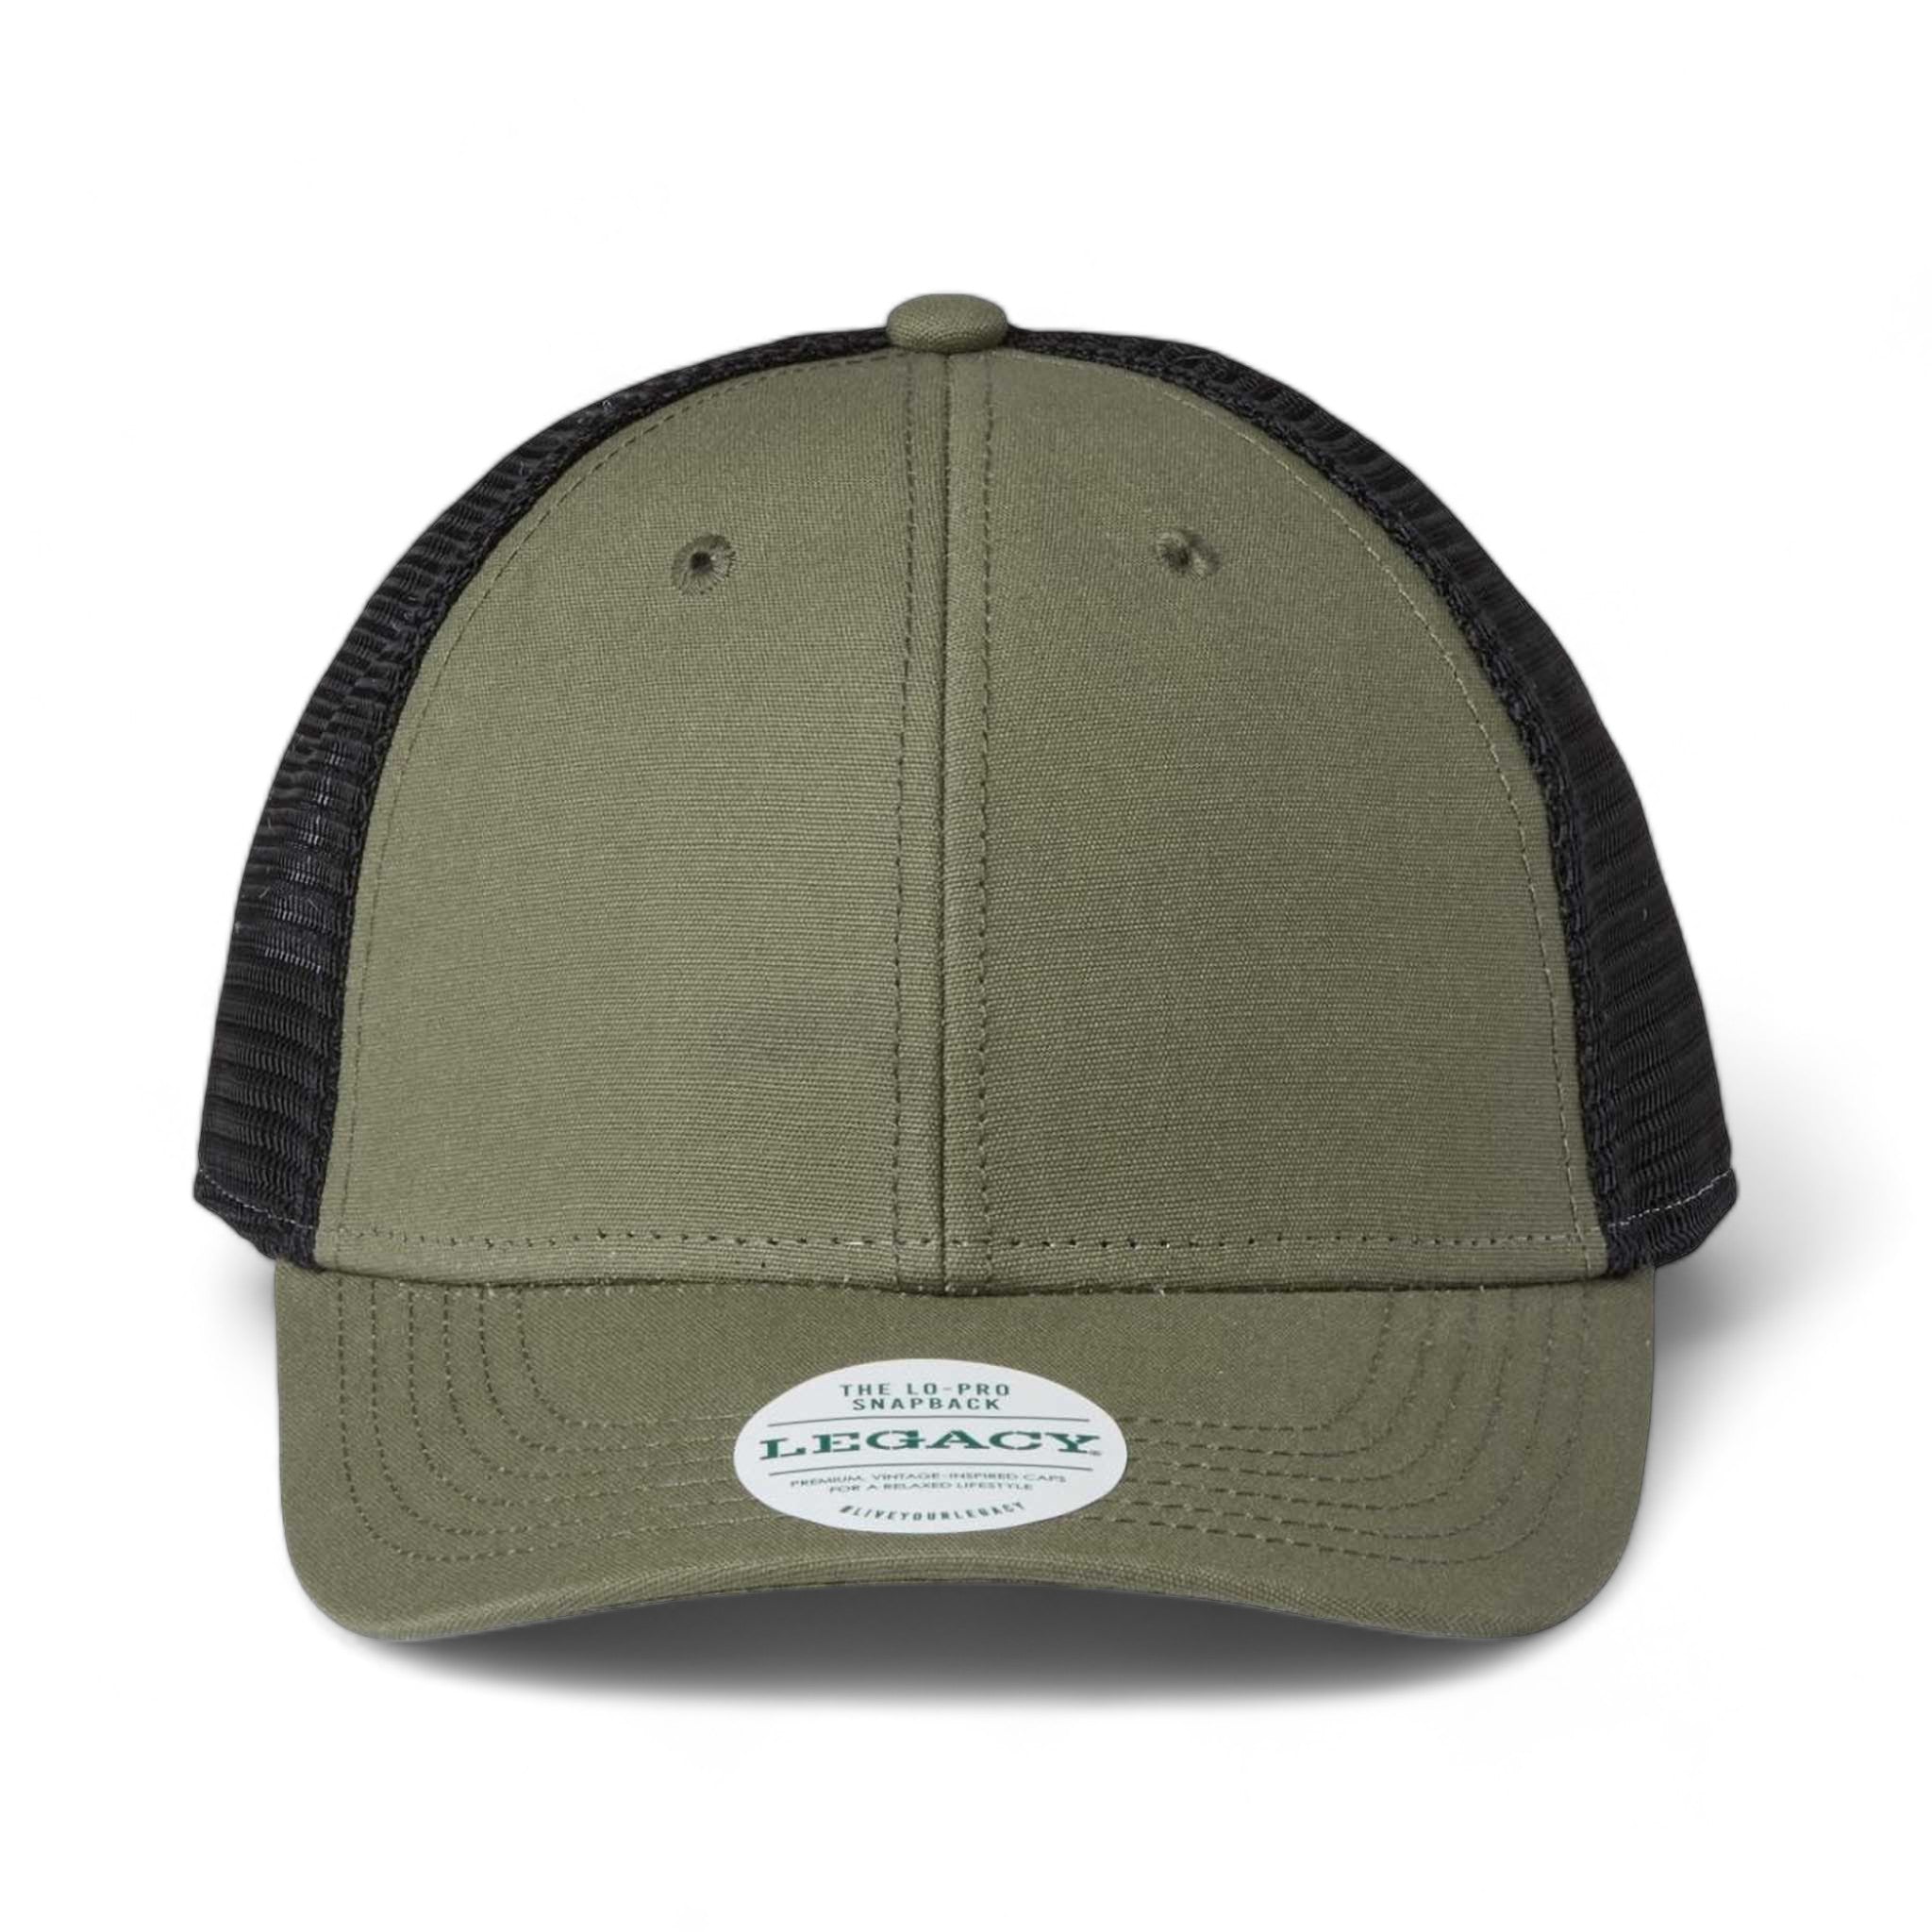 Front view of LEGACY LPS custom hat in olive and black